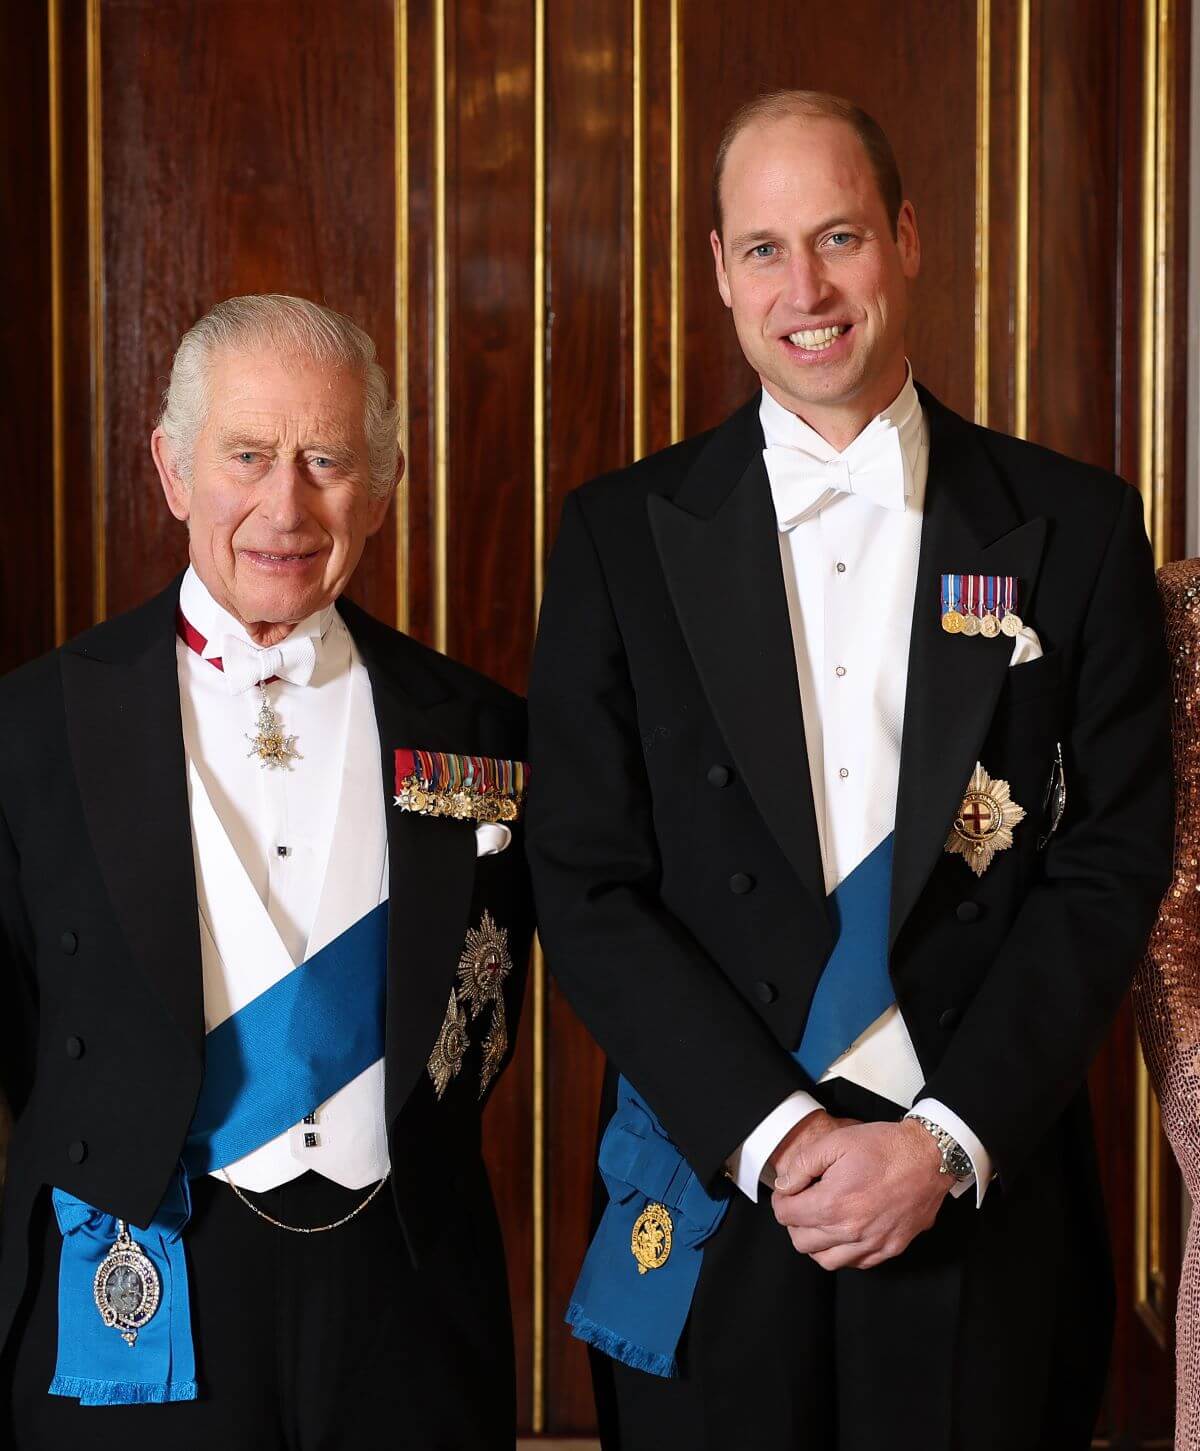 King Charles III and Prince William pose for a photograph ahead of The Diplomatic Reception in the 1844 Room at Buckingham Palace